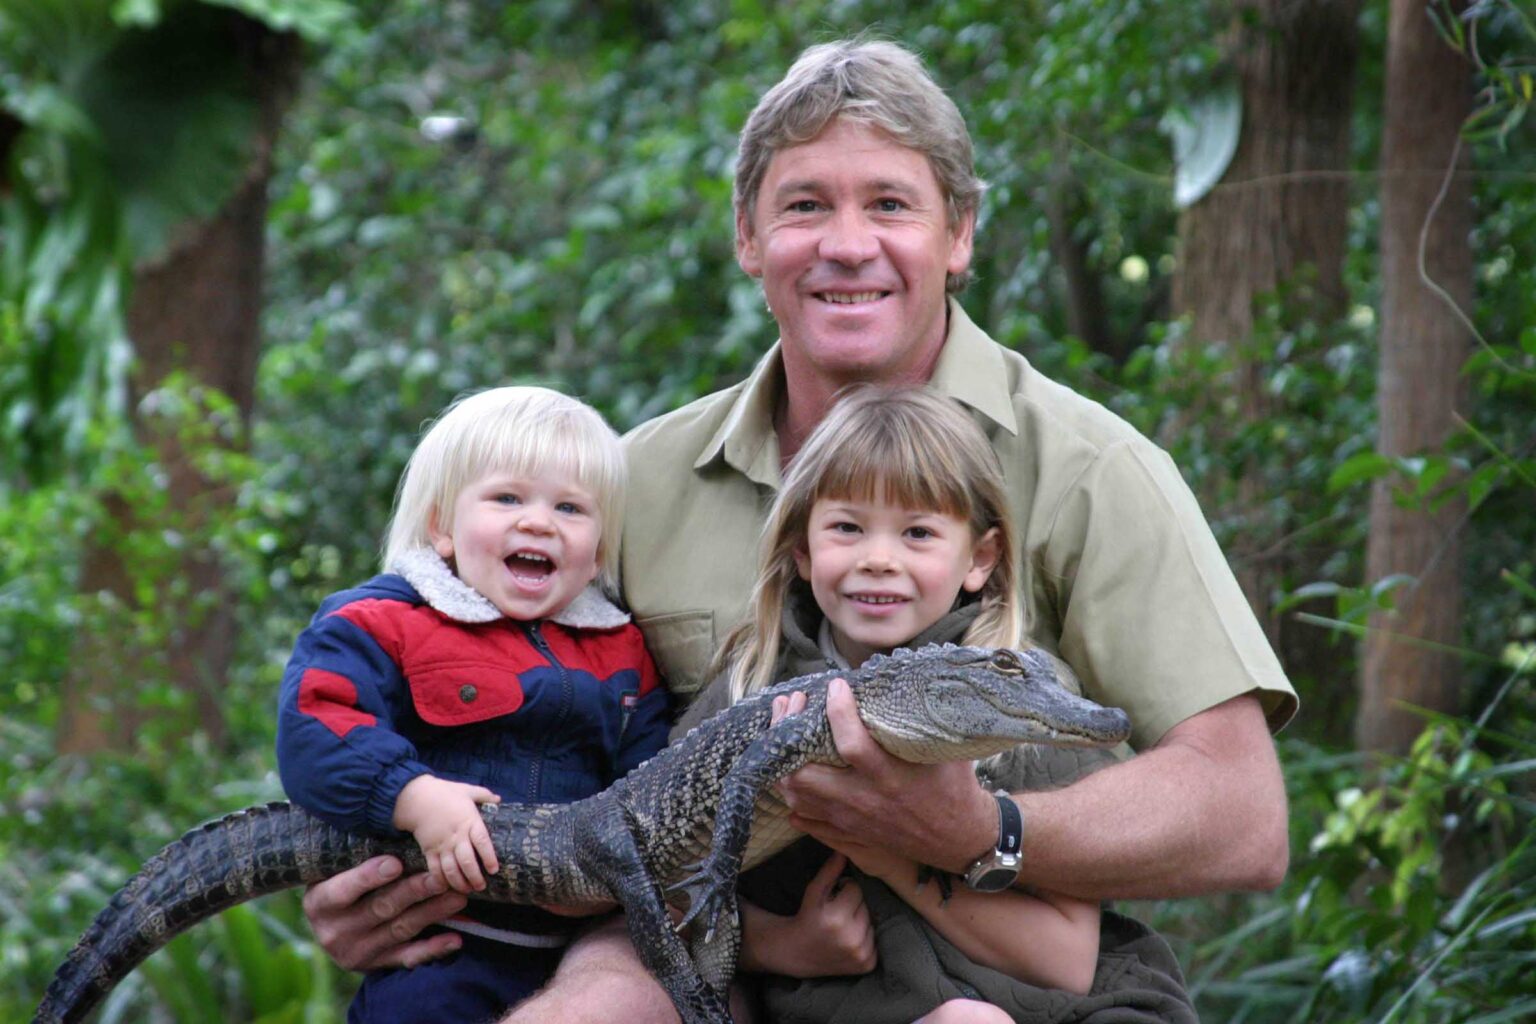 Long live the Crocodile Hunter! Scroll through some adorable pics of the kids of Steve Irwin who are keeping their father's legacy alive.